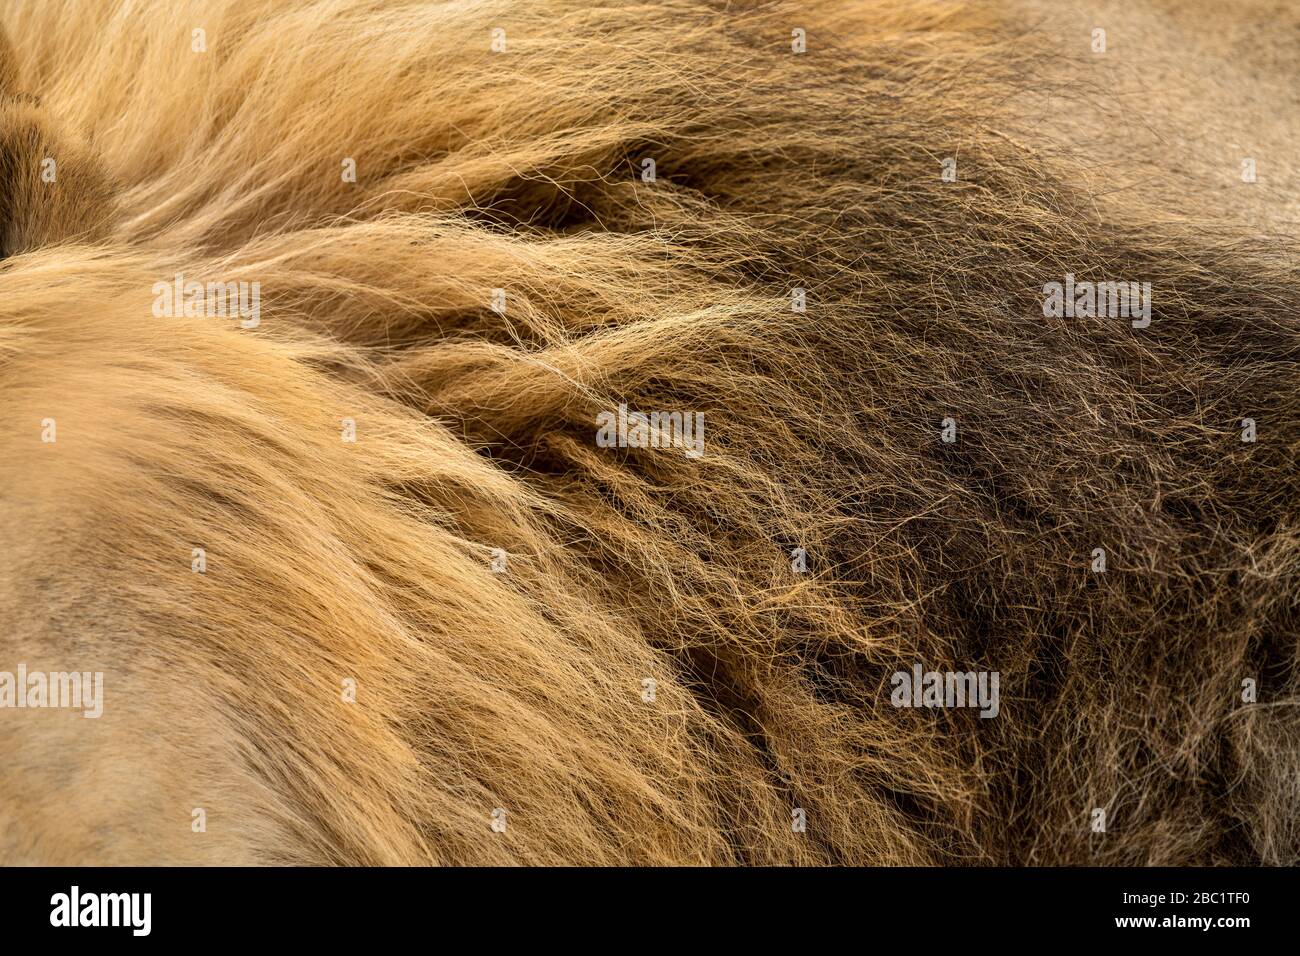 A close up detail photograph of the black and brown mane of a large male lion, taken in the madike Game Reserve, South Africa. Stock Photo